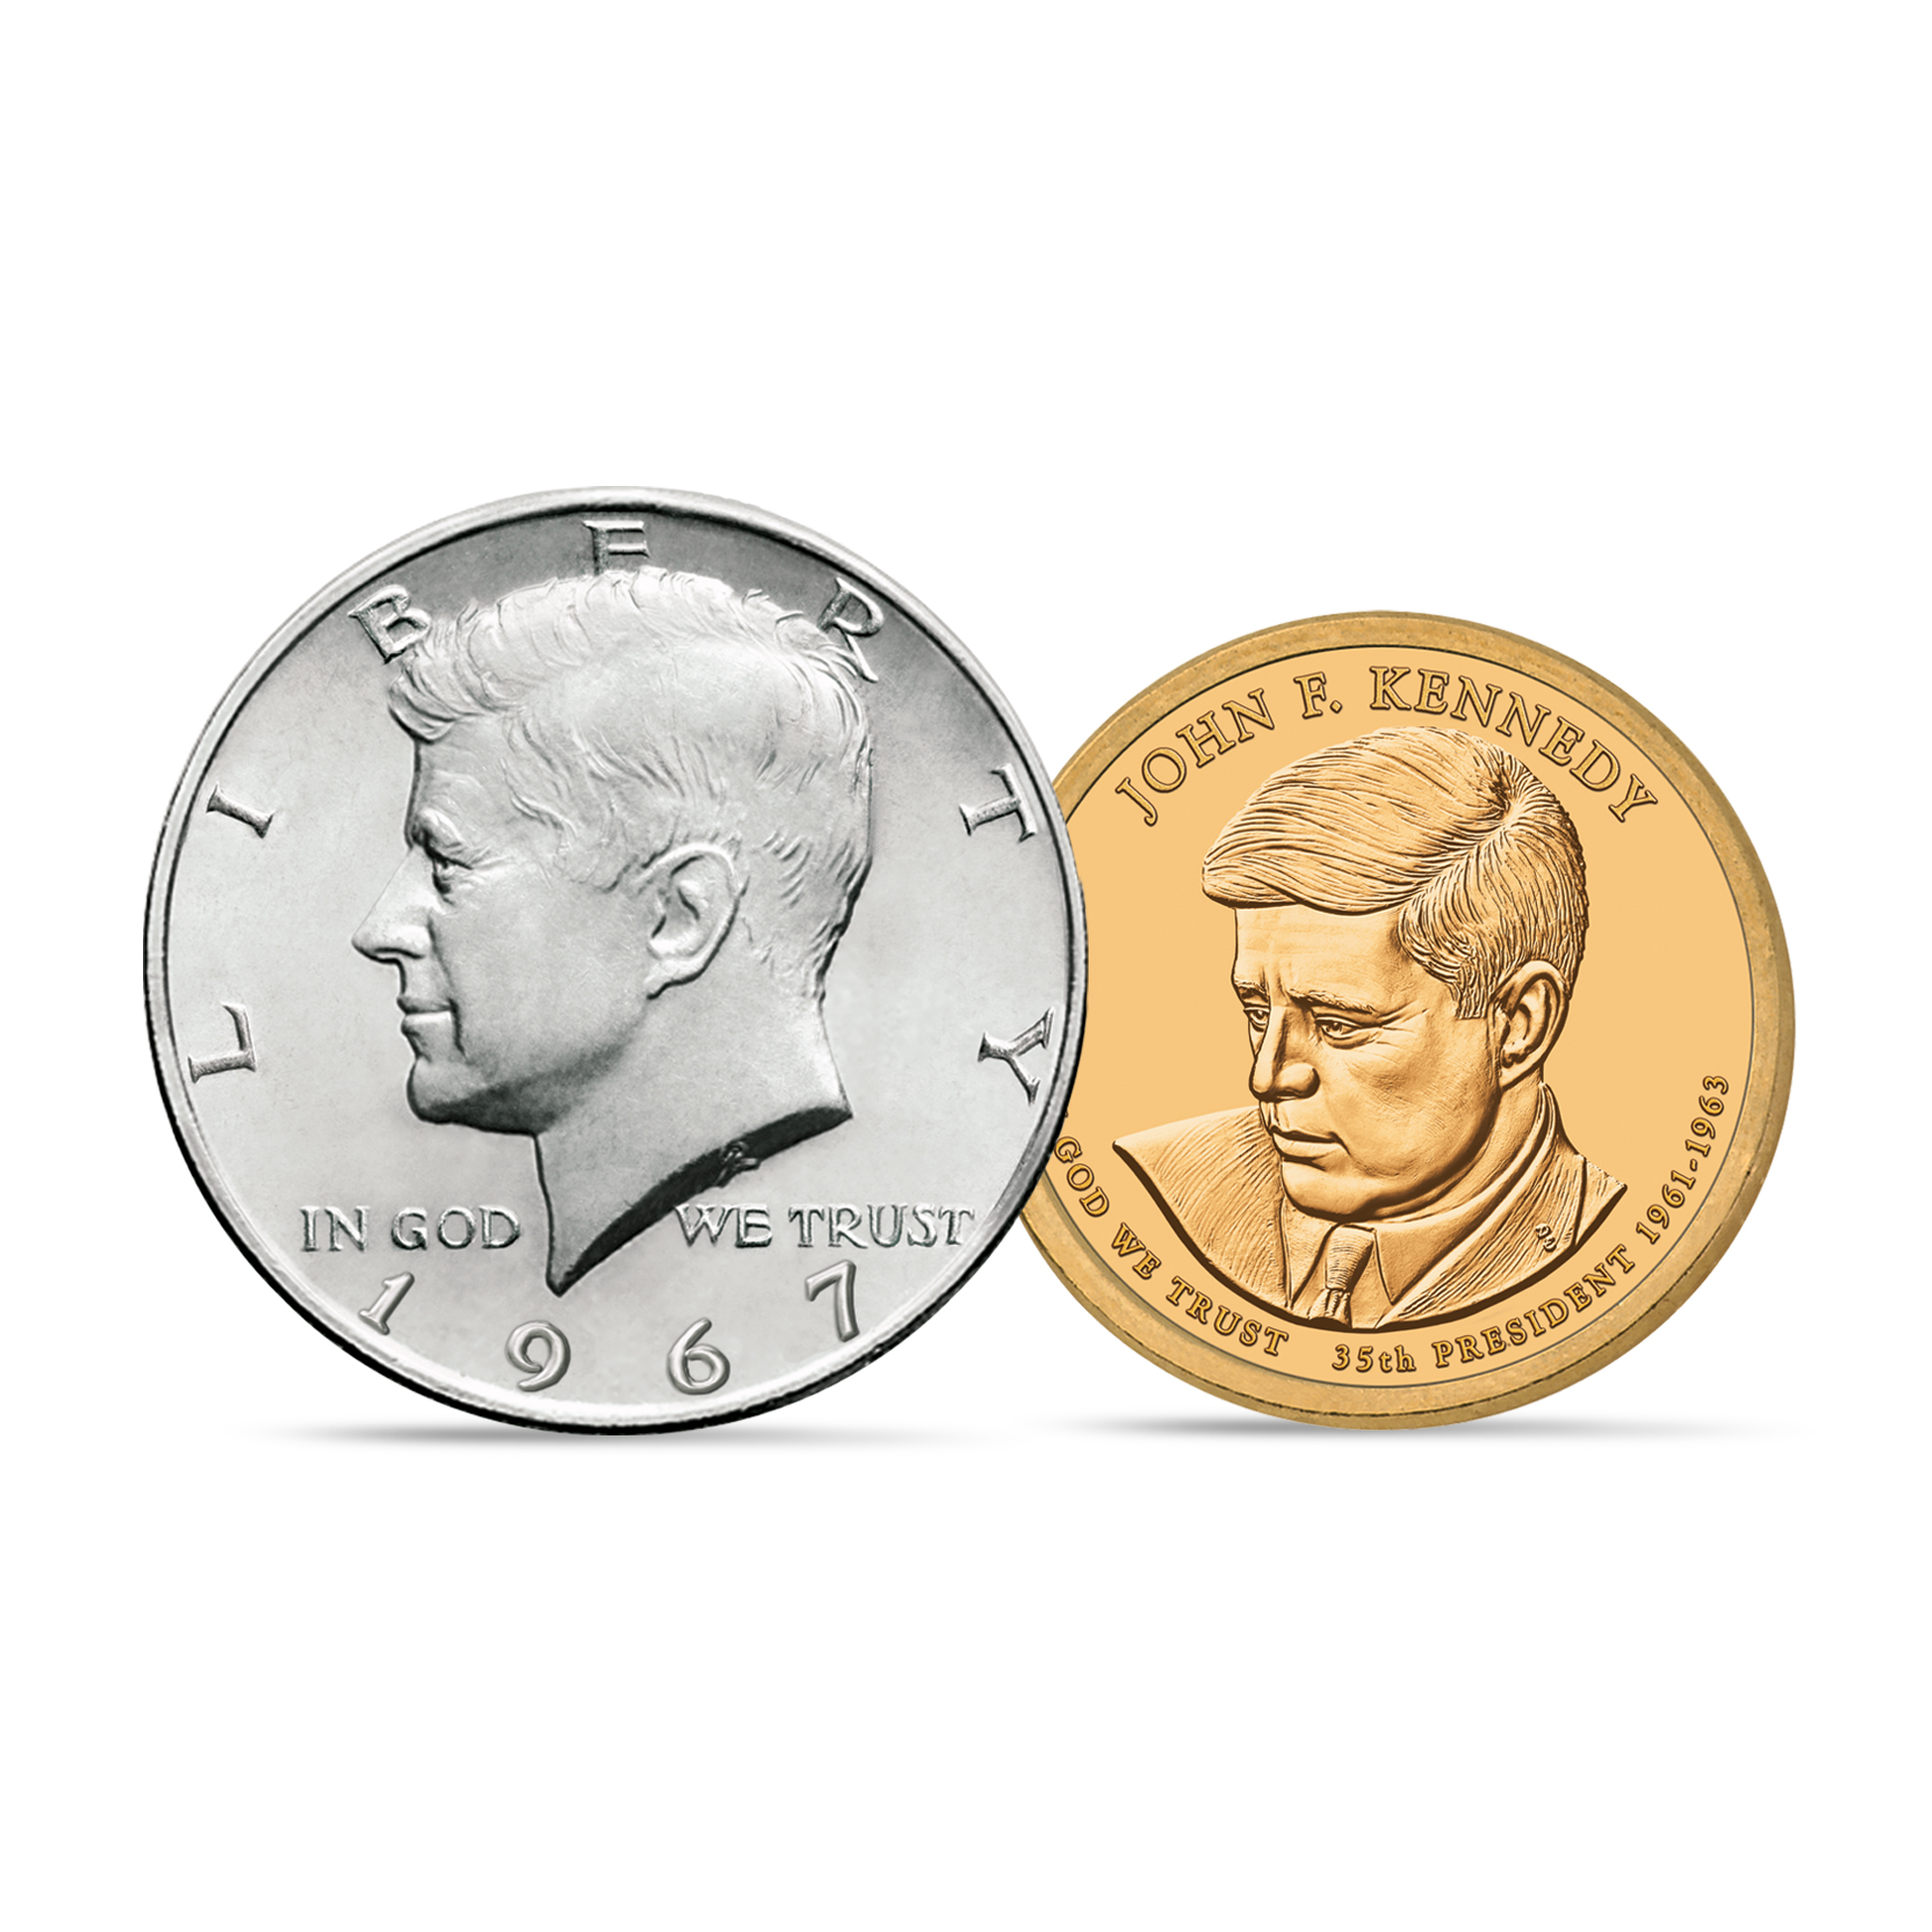 John FKennedy Coin Currency Set 10704 0024 c display